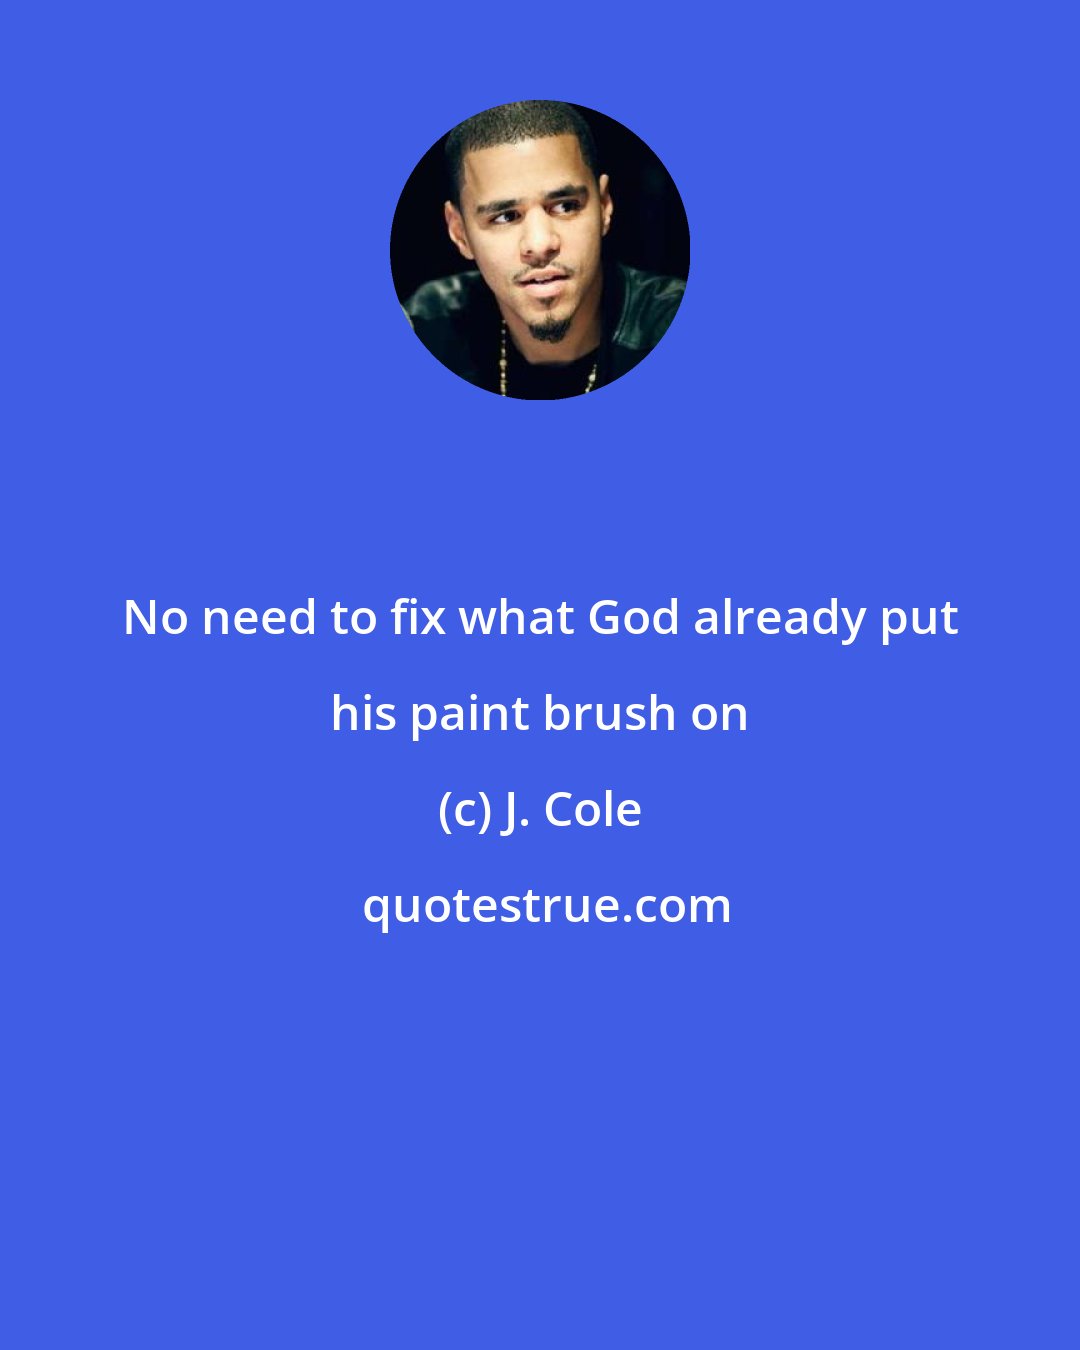 J. Cole: No need to fix what God already put his paint brush on